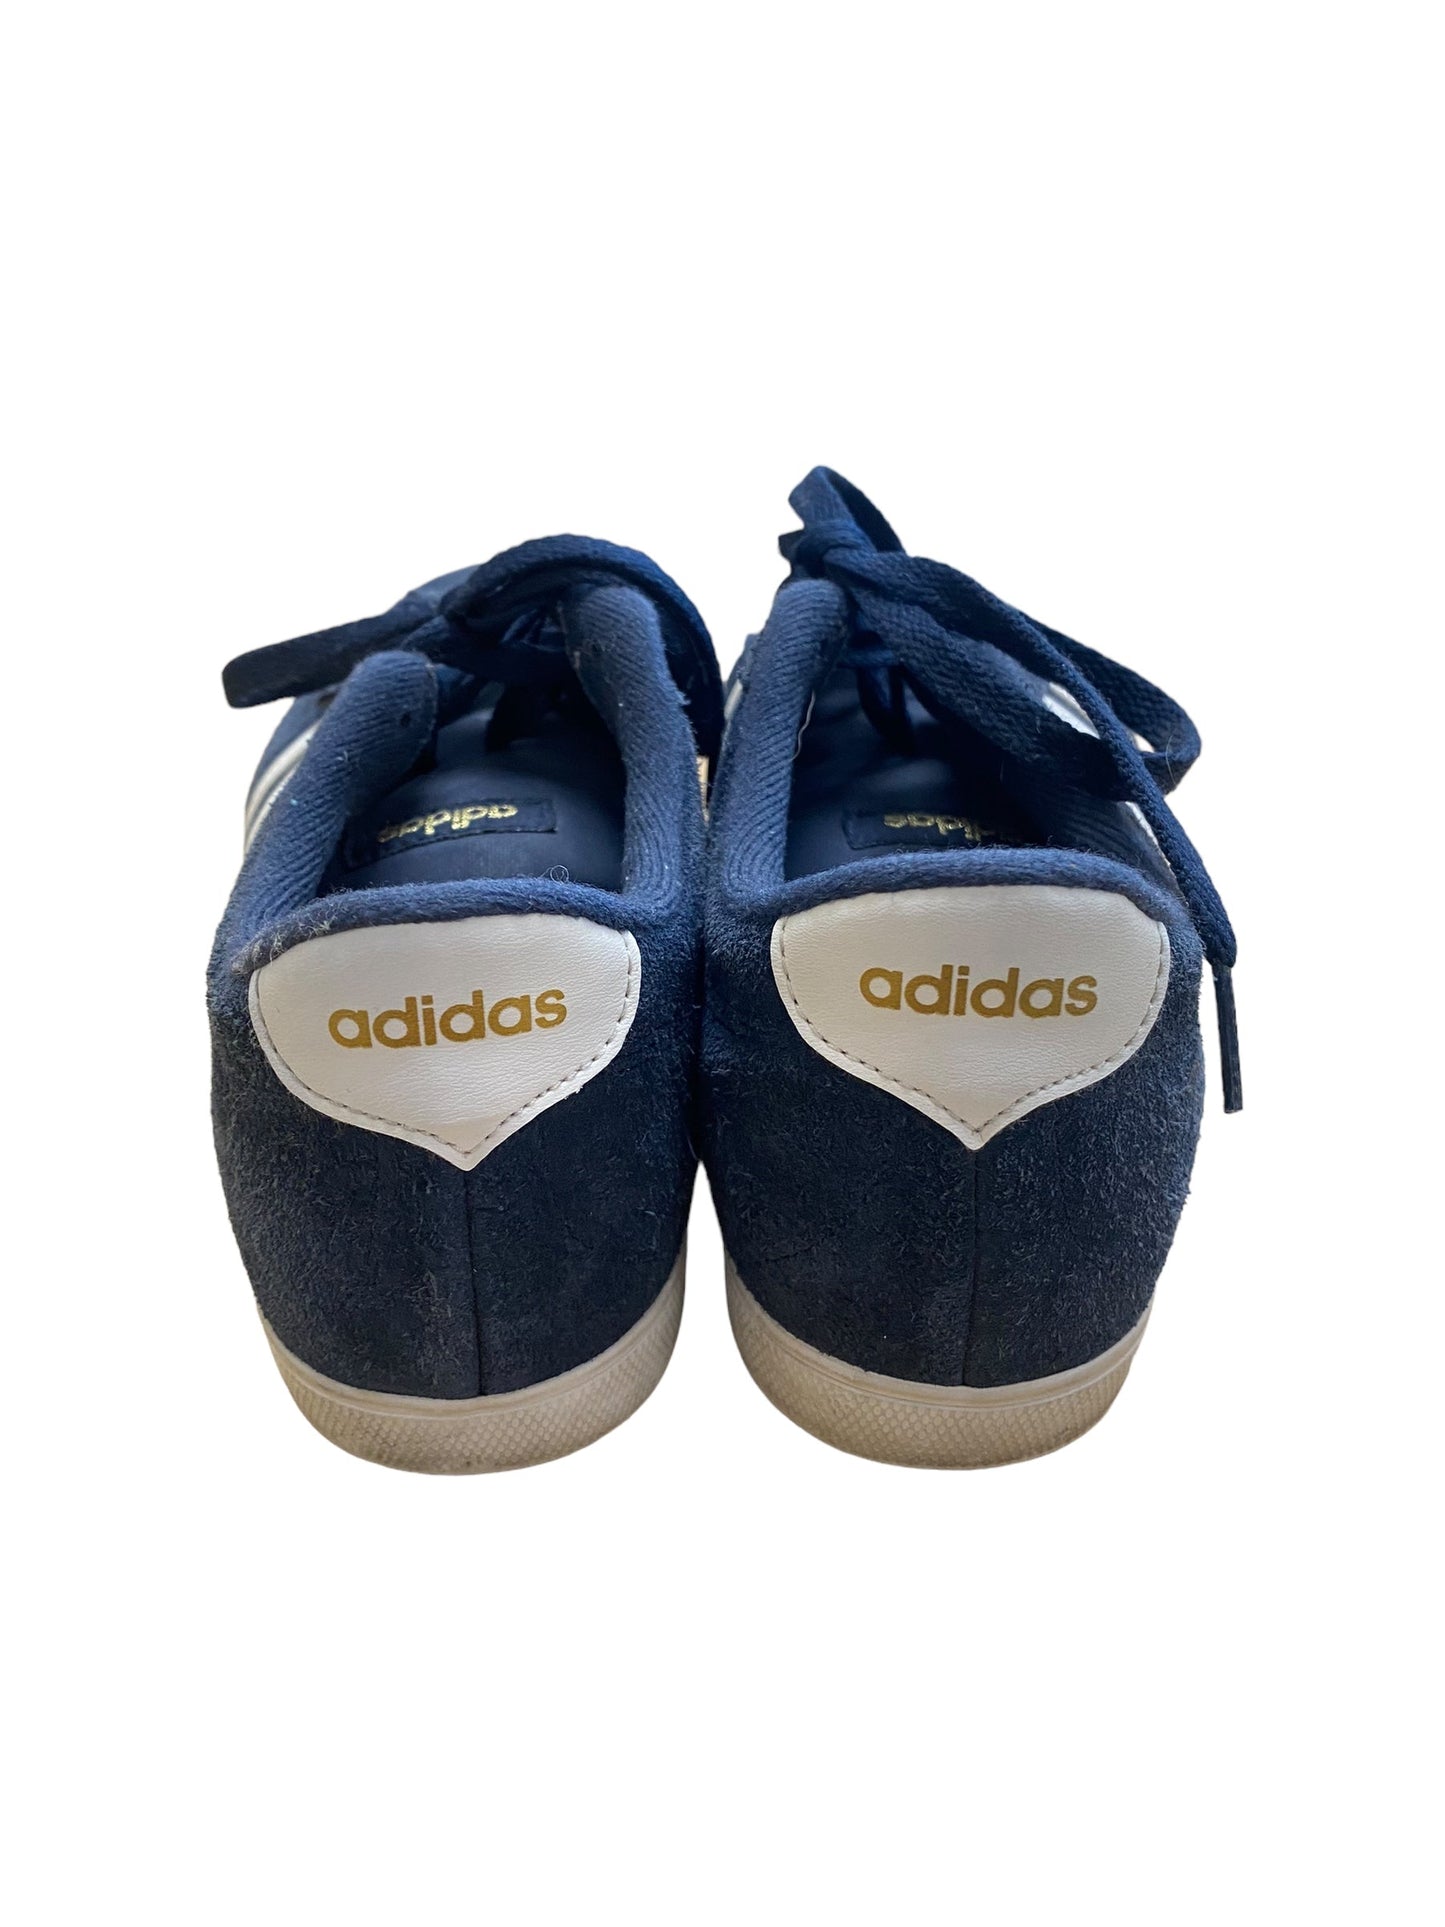 Shoes Sneakers By Adidas  Size: 10